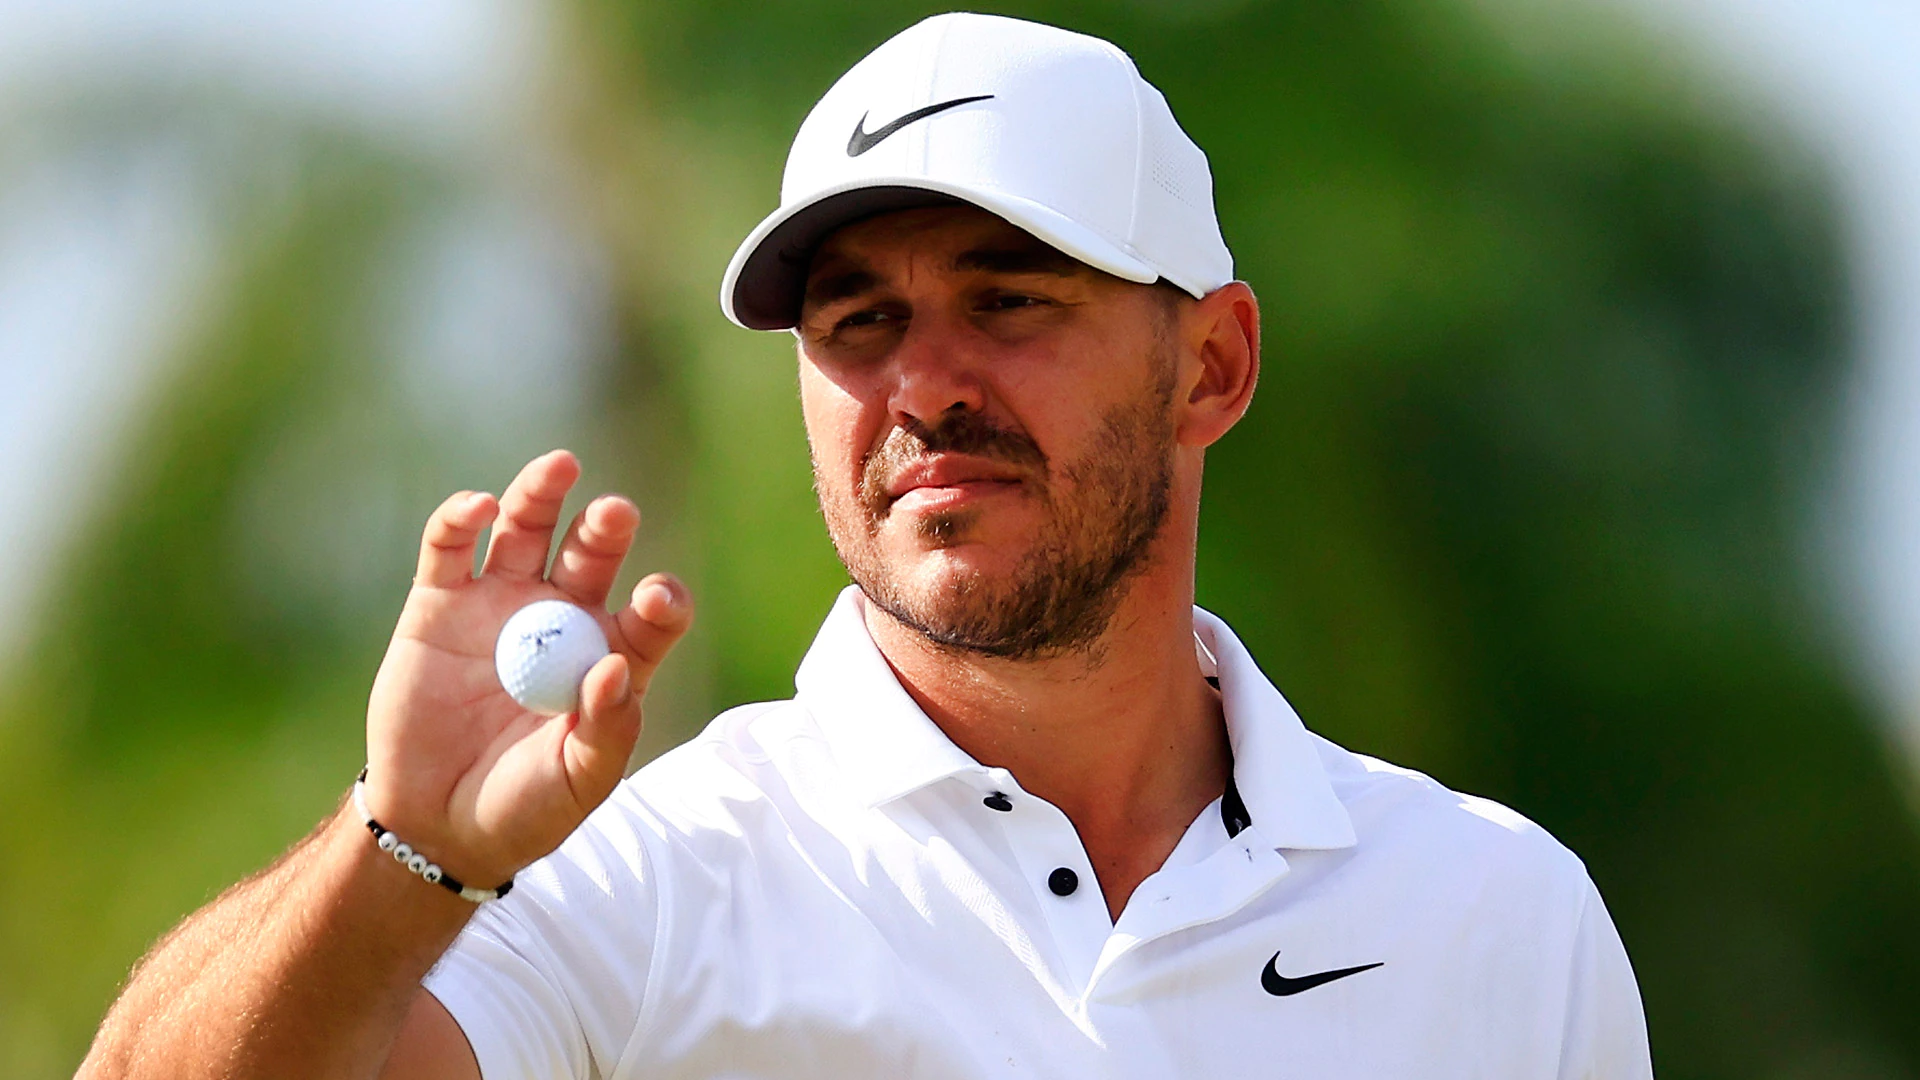 Brooks Koepka’s record on No. 17 at TPC Sawgrass started awfully, hasn’t improved